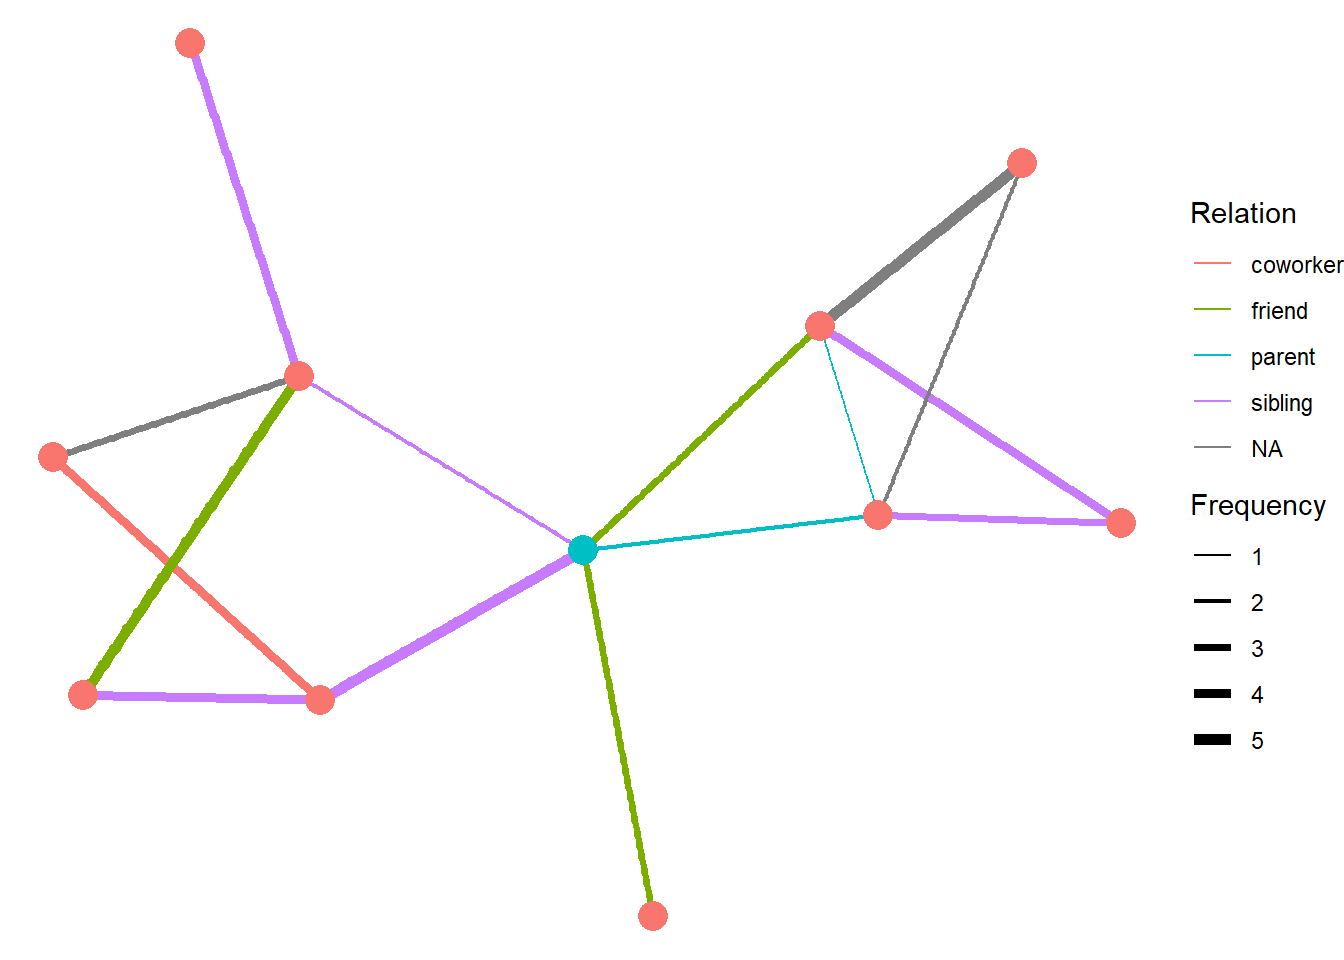 A graph of the hypothetical ego network described in the text above. Ego is shown in blue.